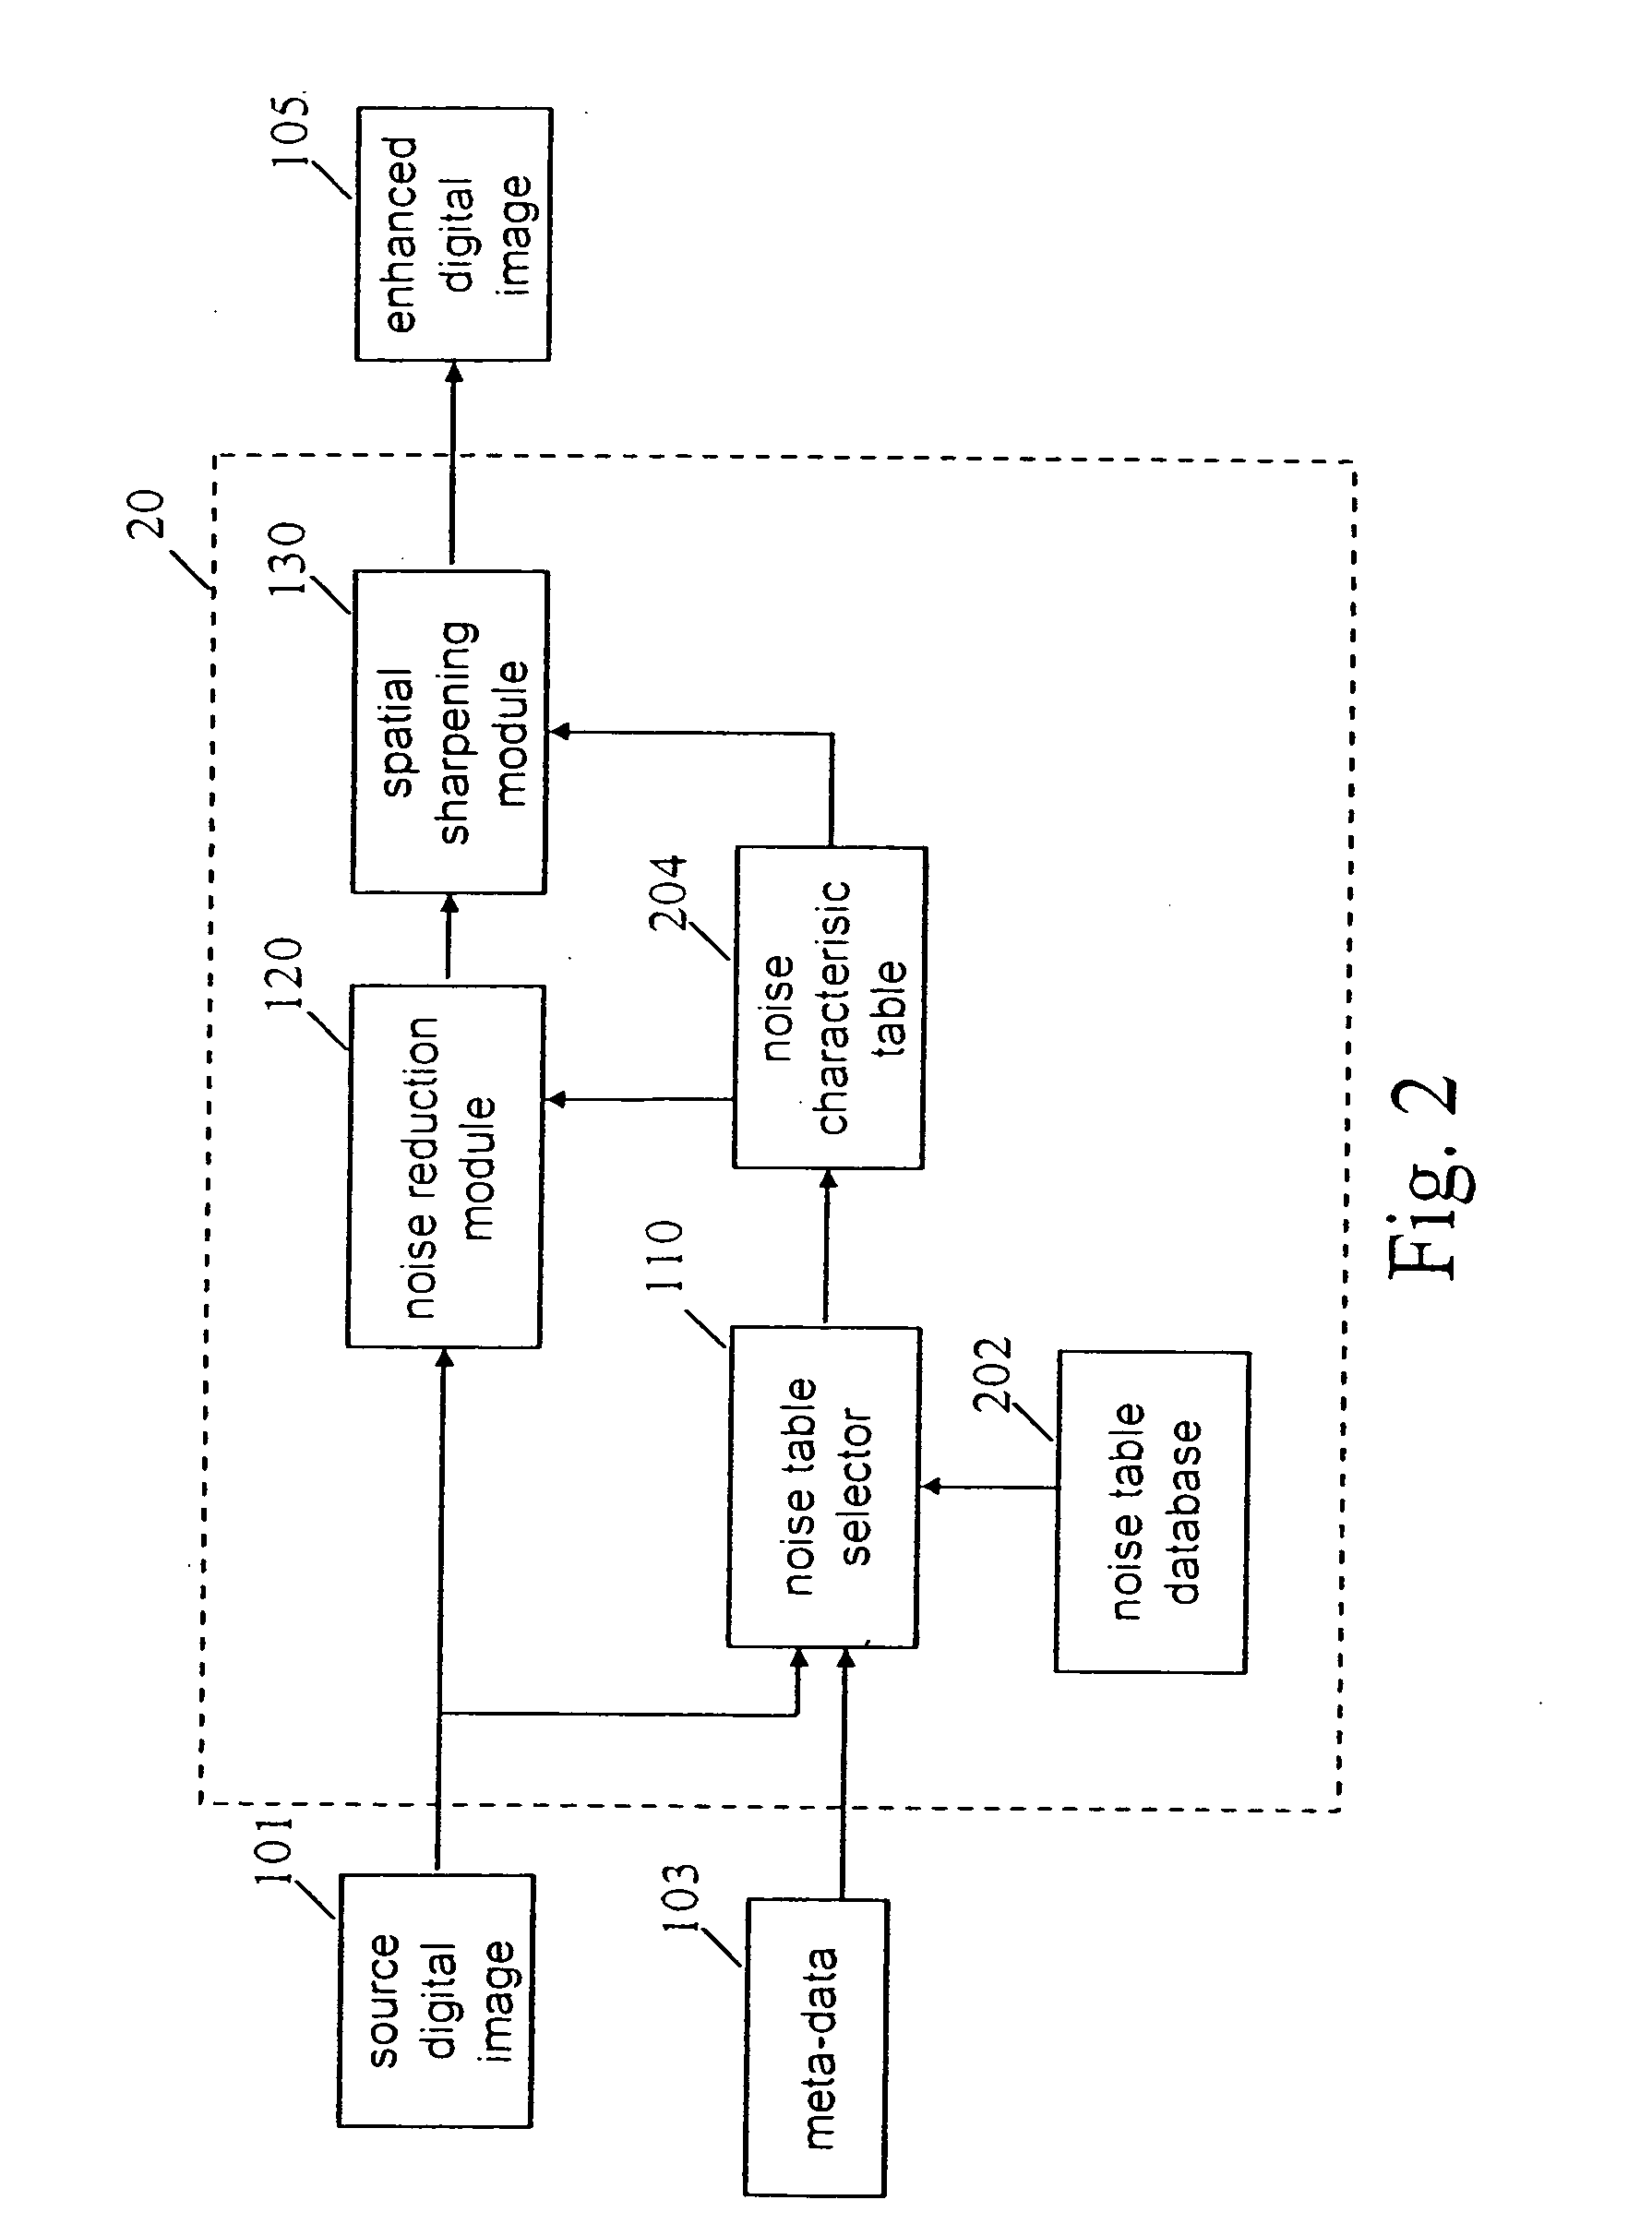 Method and apparatus for enhancing digital images utilizing non-image data